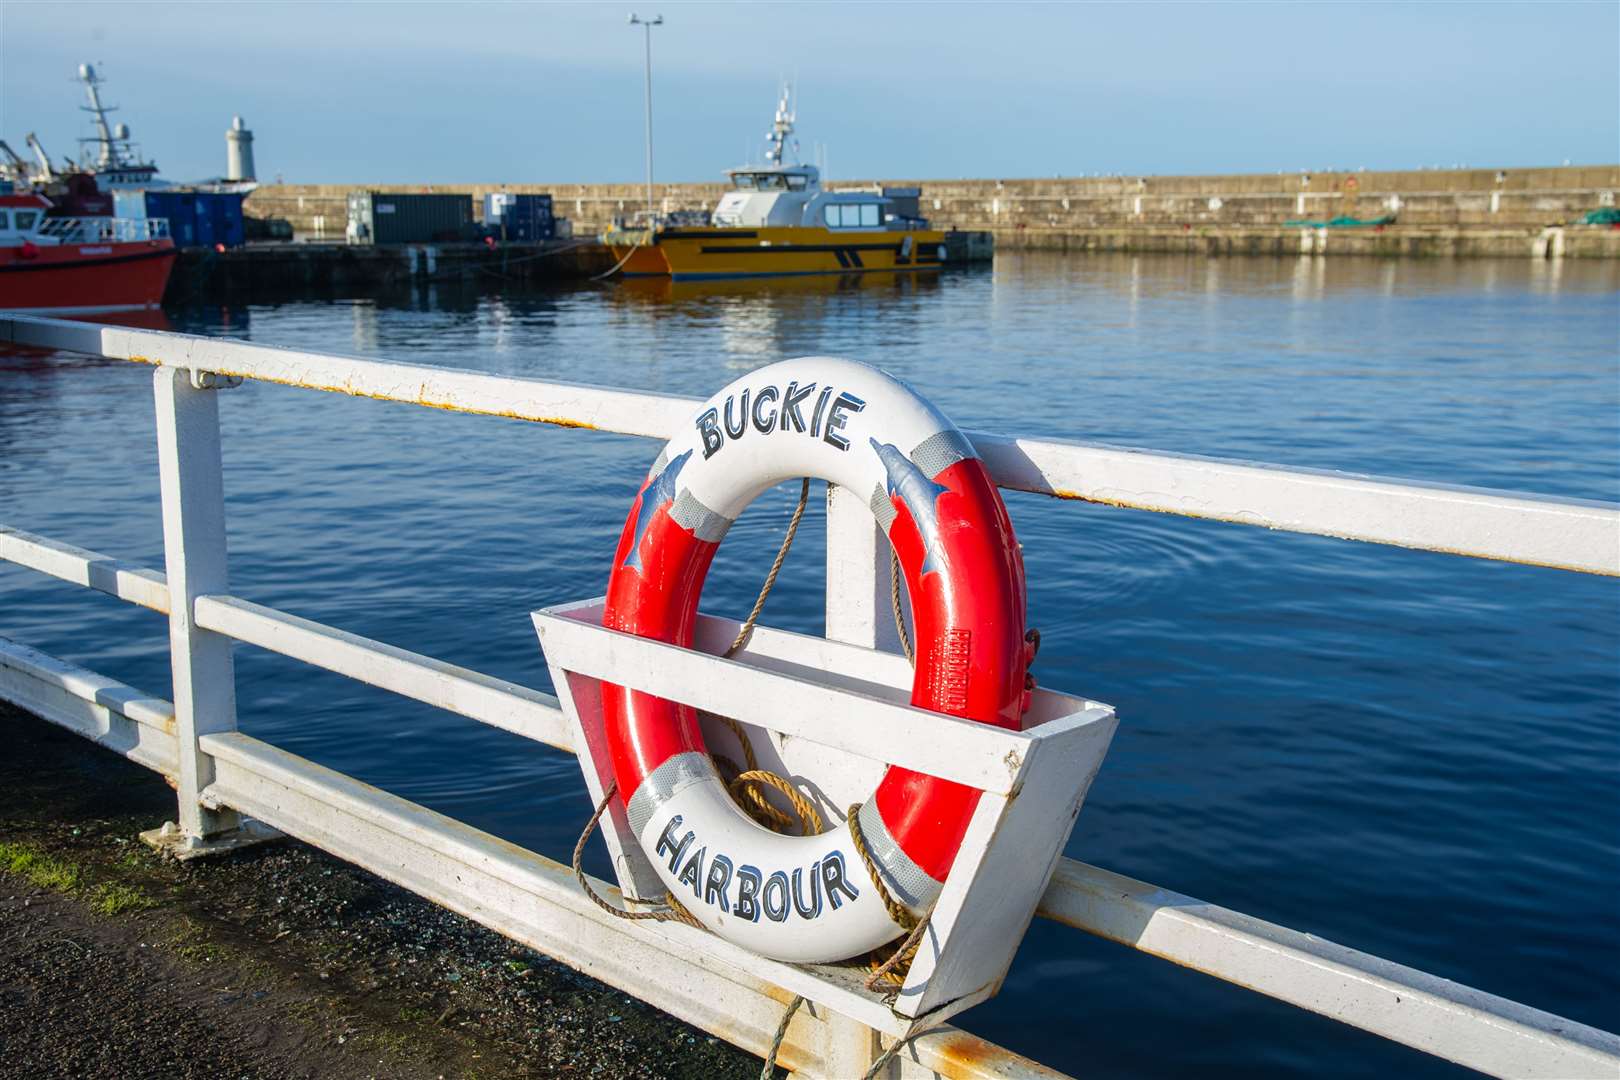 There was no activity on the fish landings and cargo vessels front at Buckie Harbour. Picture: Daniel Forsyth